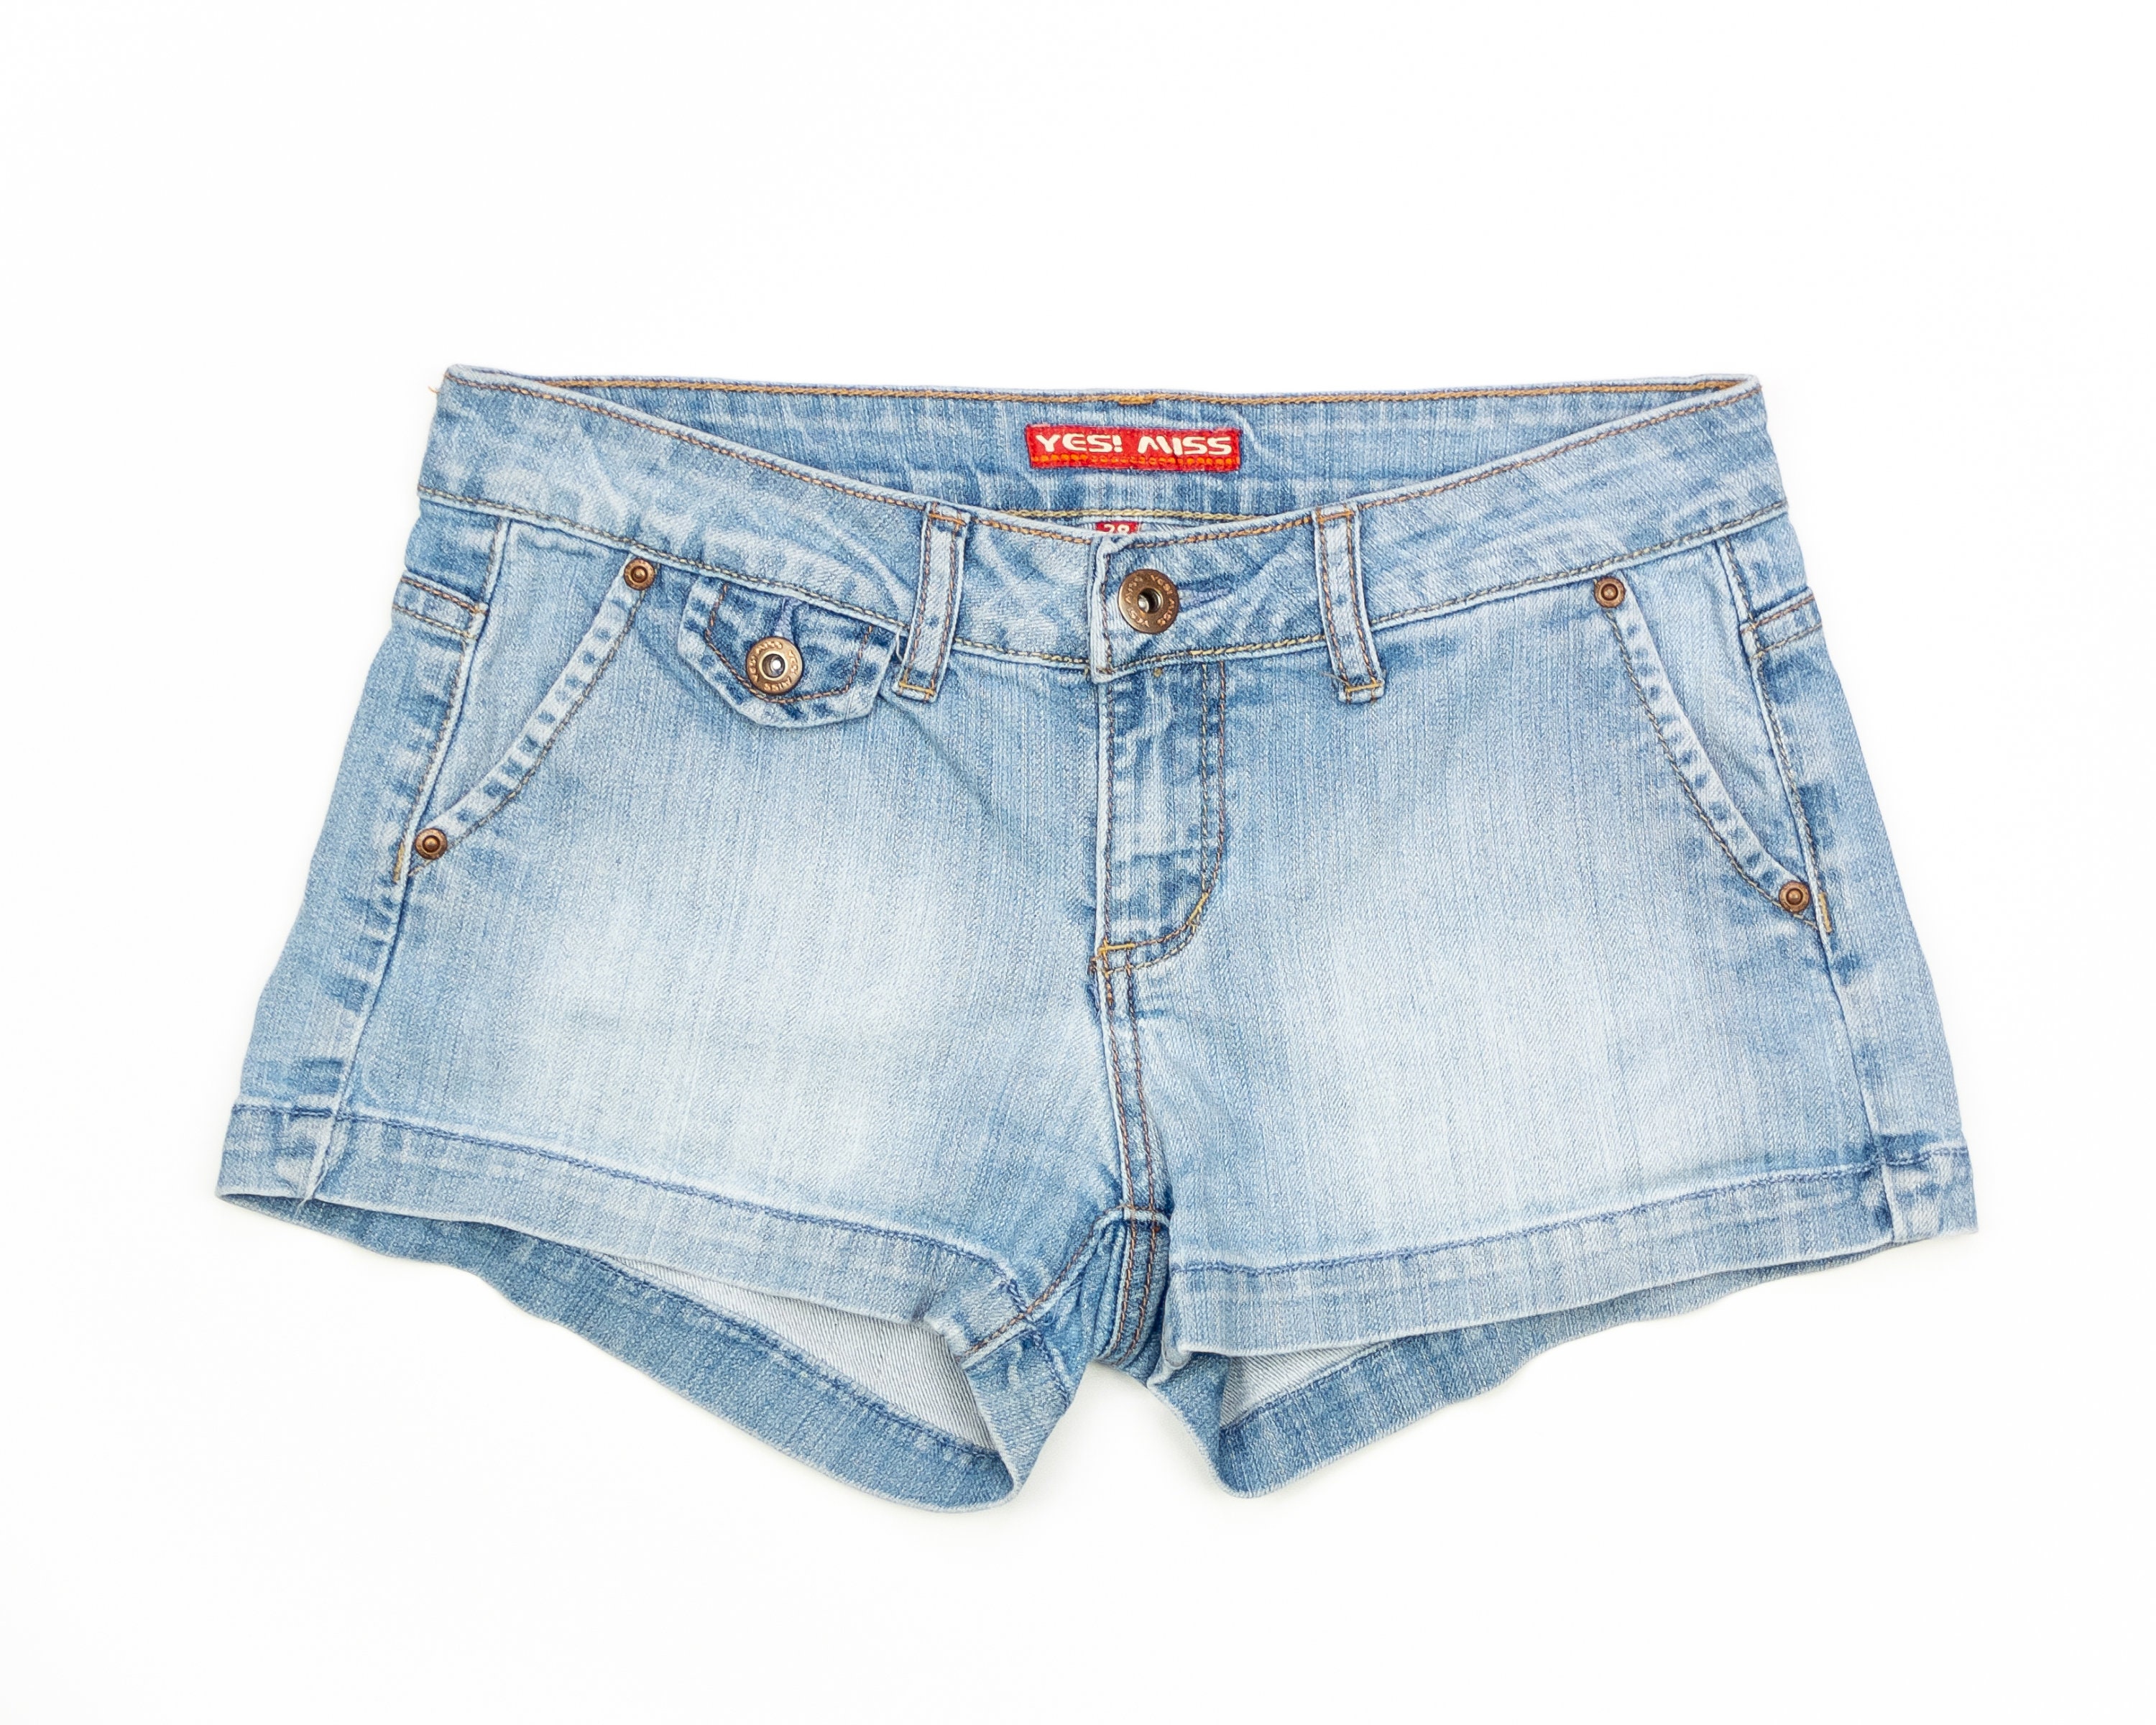 Y2K BOOTY Shorts / 00s Low Rise Shorts / Vintage DENIM Shorts / Hips 38  Inches / Waist 28 Inches -  Canada